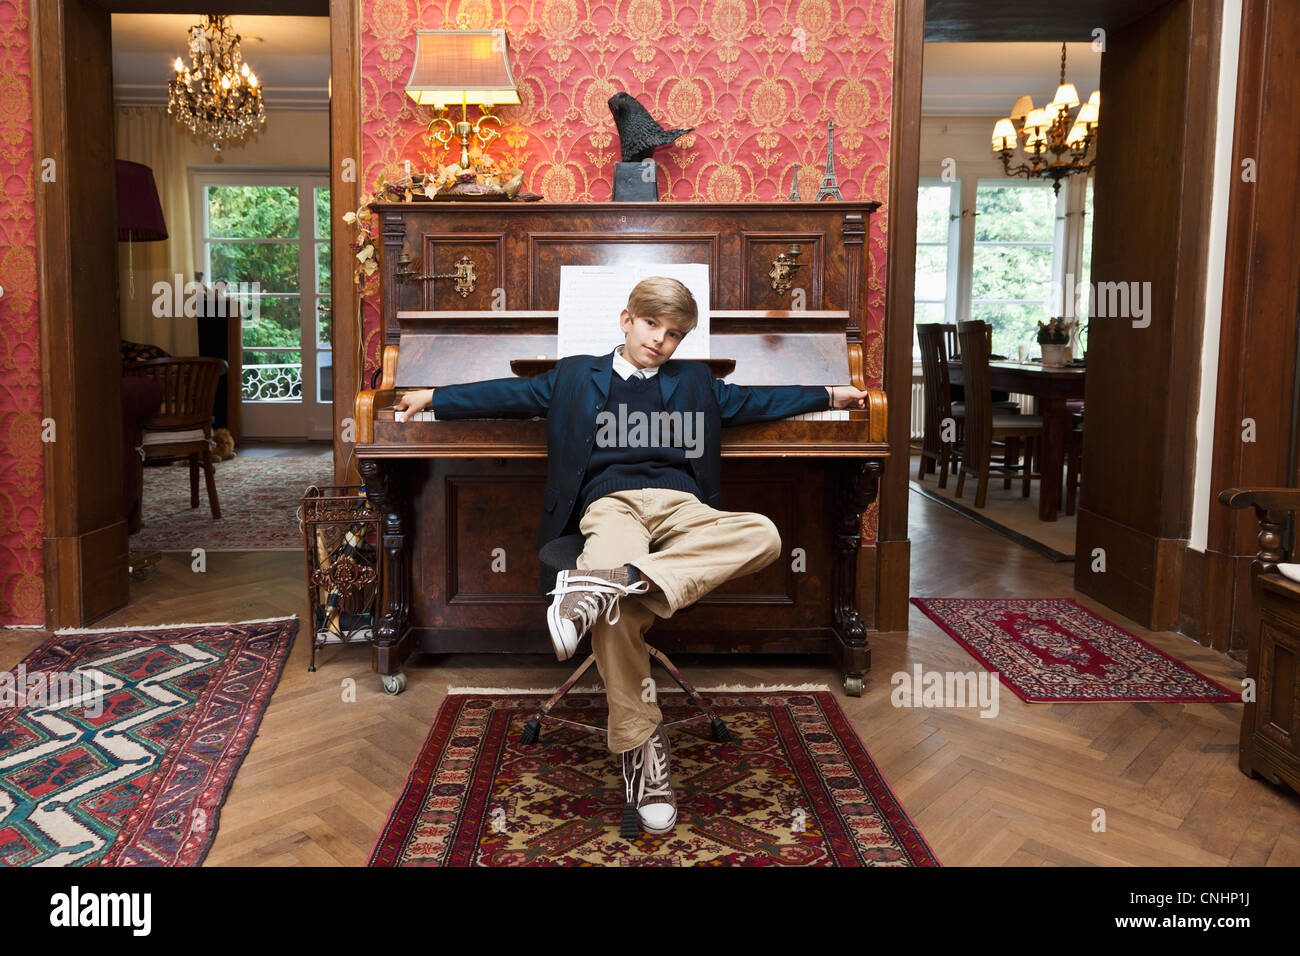 A boy with a cool attitude posing at an old-fashioned upright piano Stock Photo